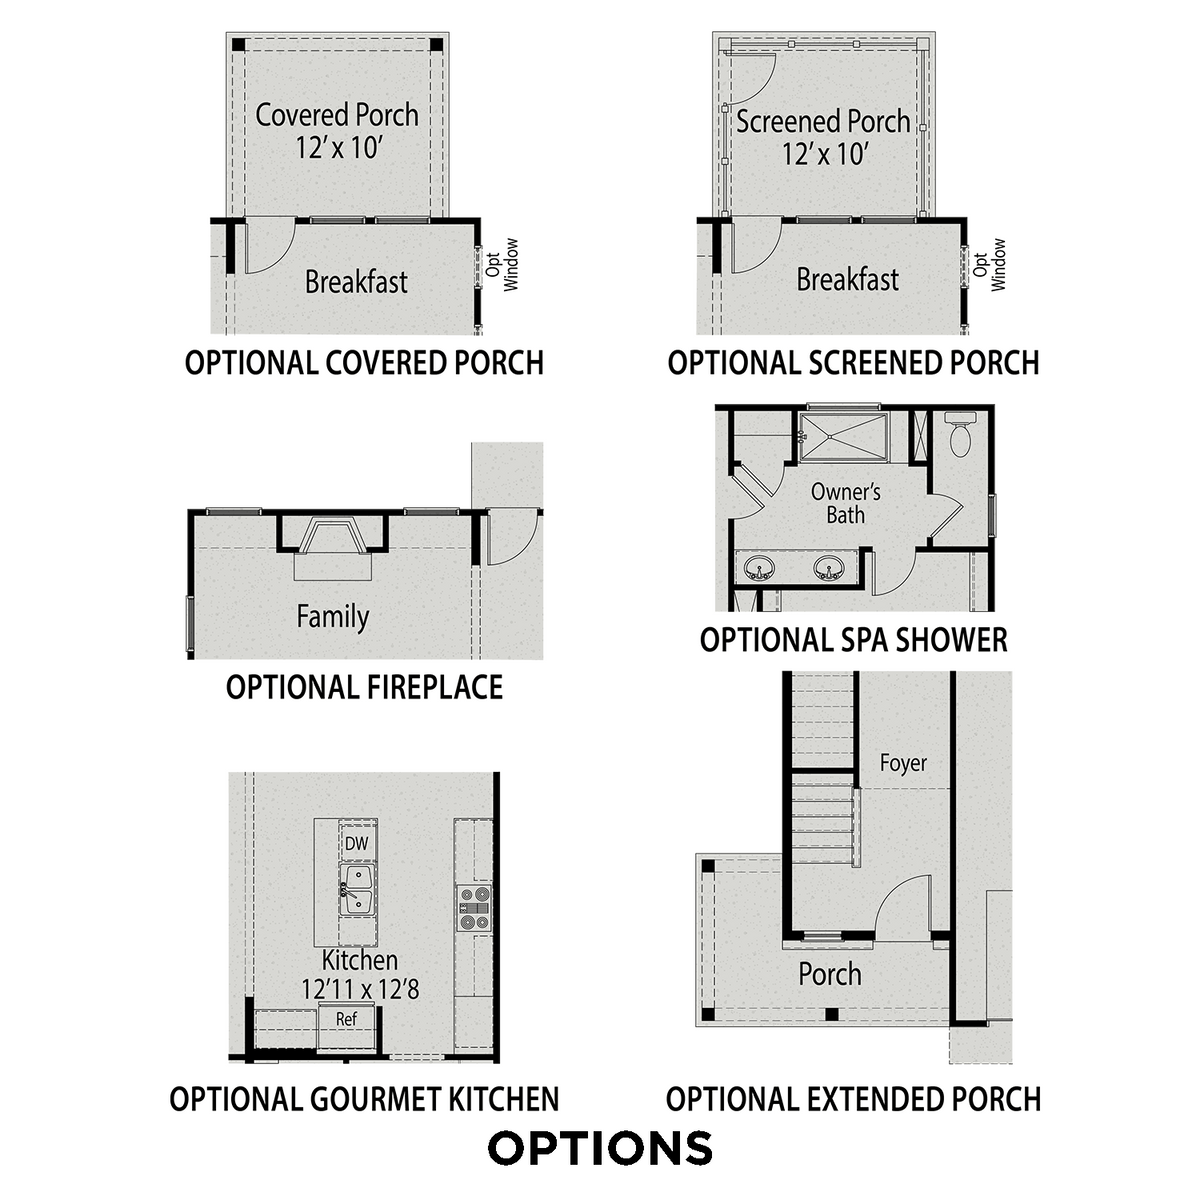 3 - The Gavin A buildable floor plan layout in Davidson Homes' Gregory Village community.